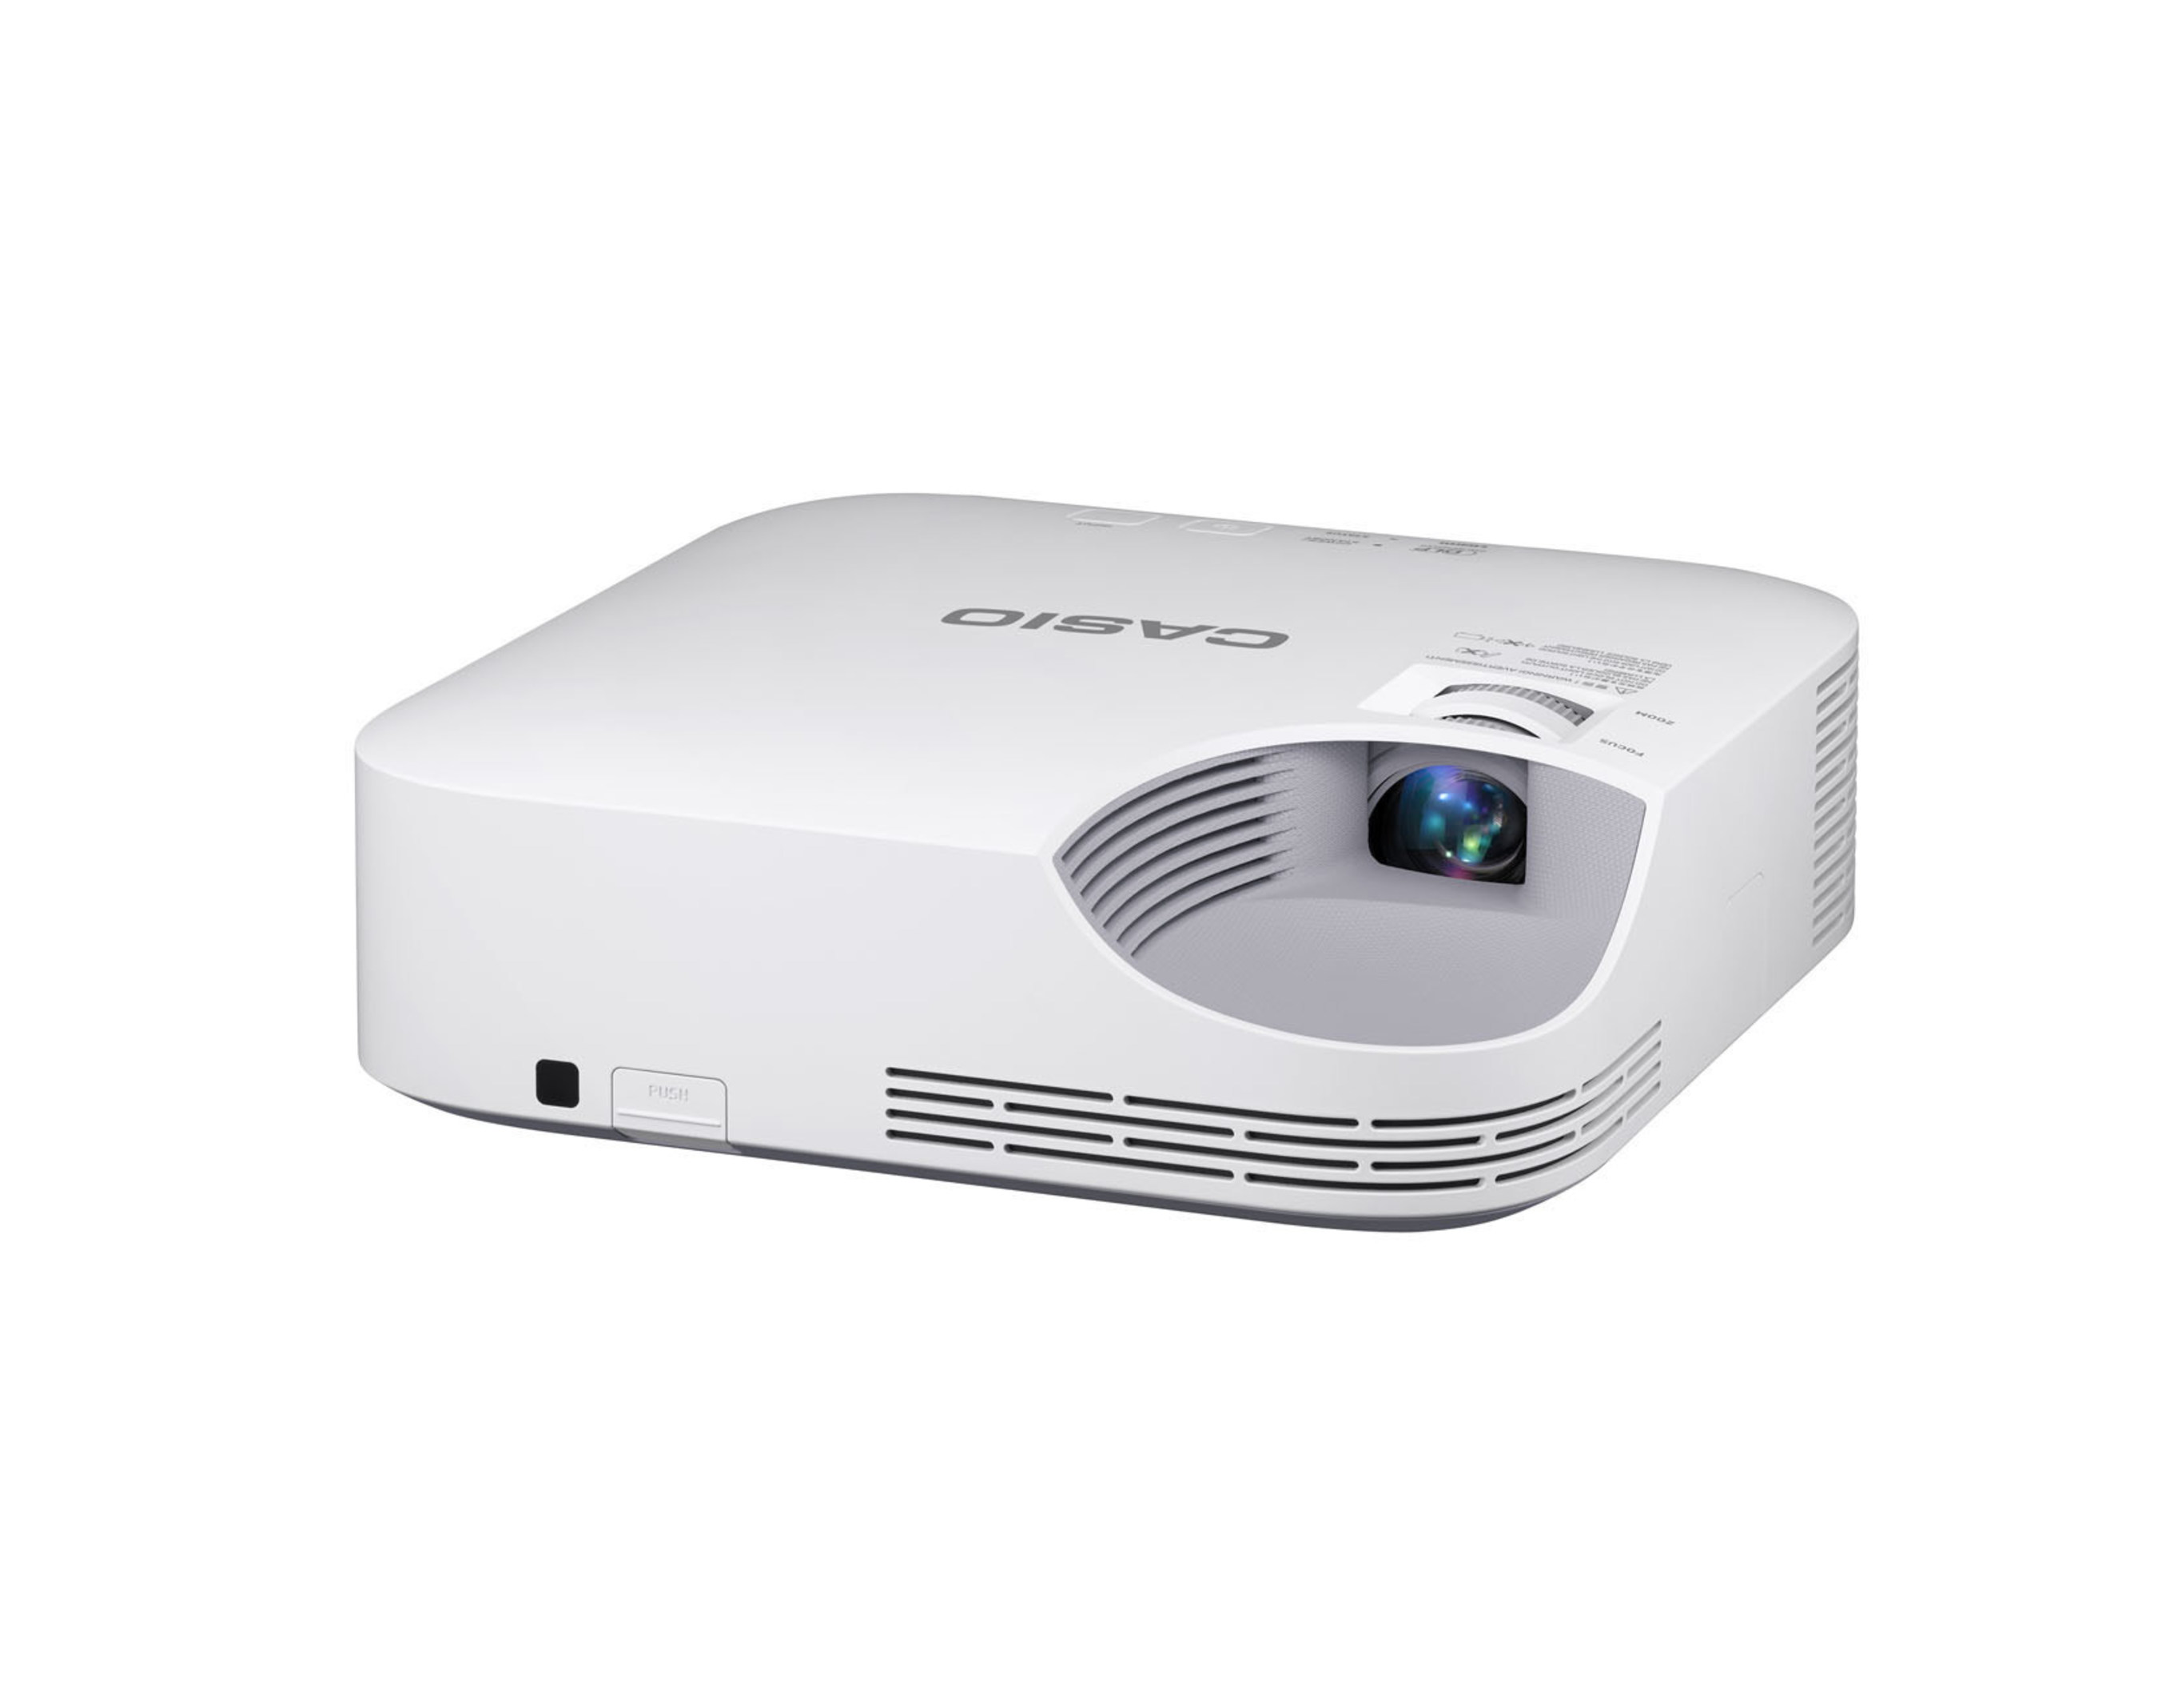 Casio Expands Its Projector Portfolio With New EcoLite(tm) LampFree(r) Model - the XJ-V1.